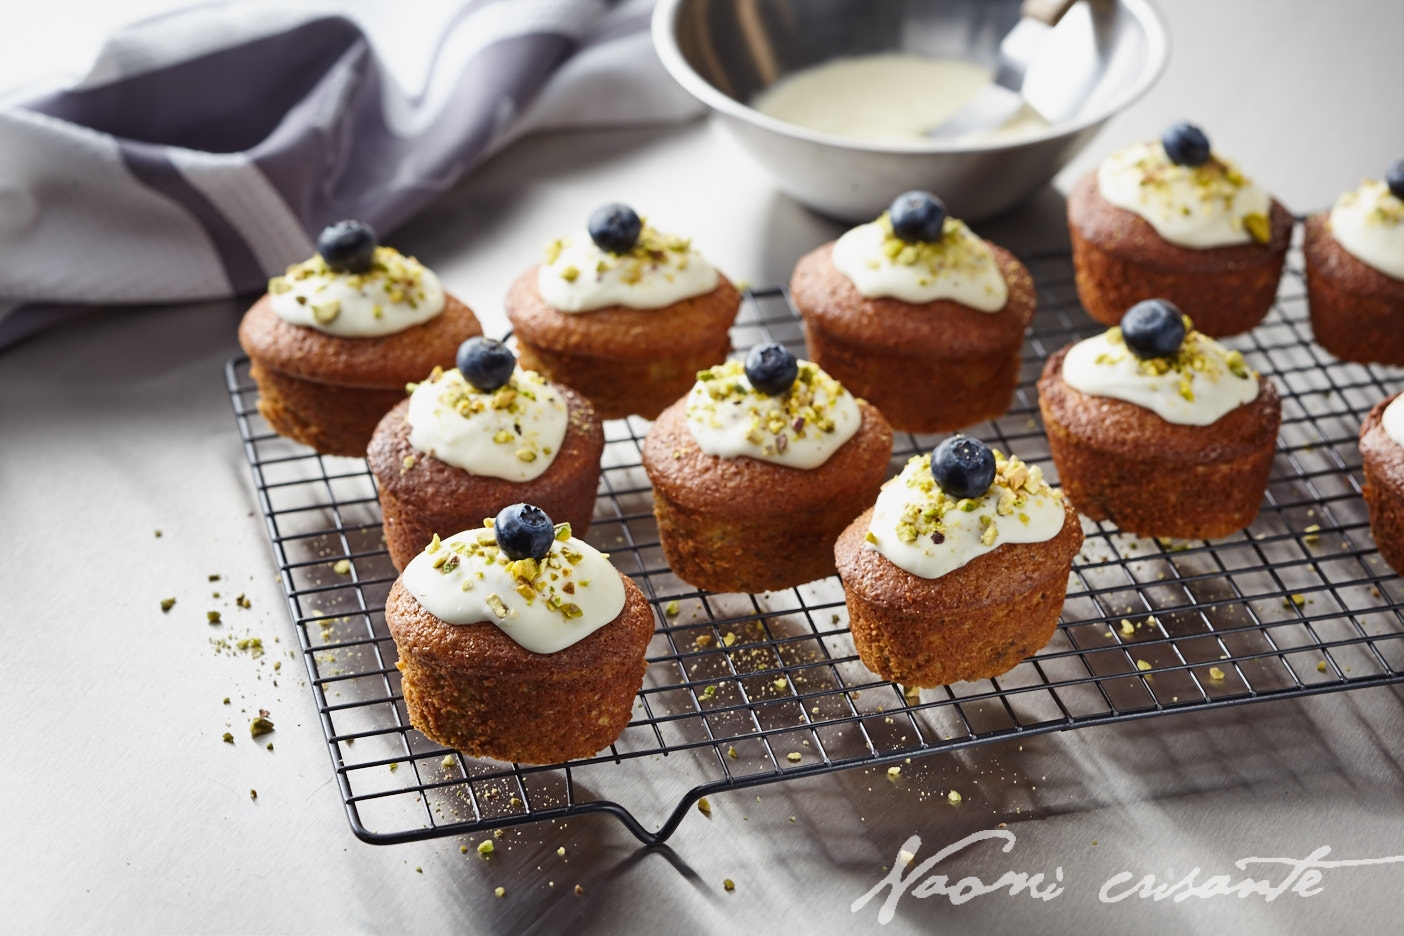 Pistachio and Blueberry Friands with Sour Cream Frosting